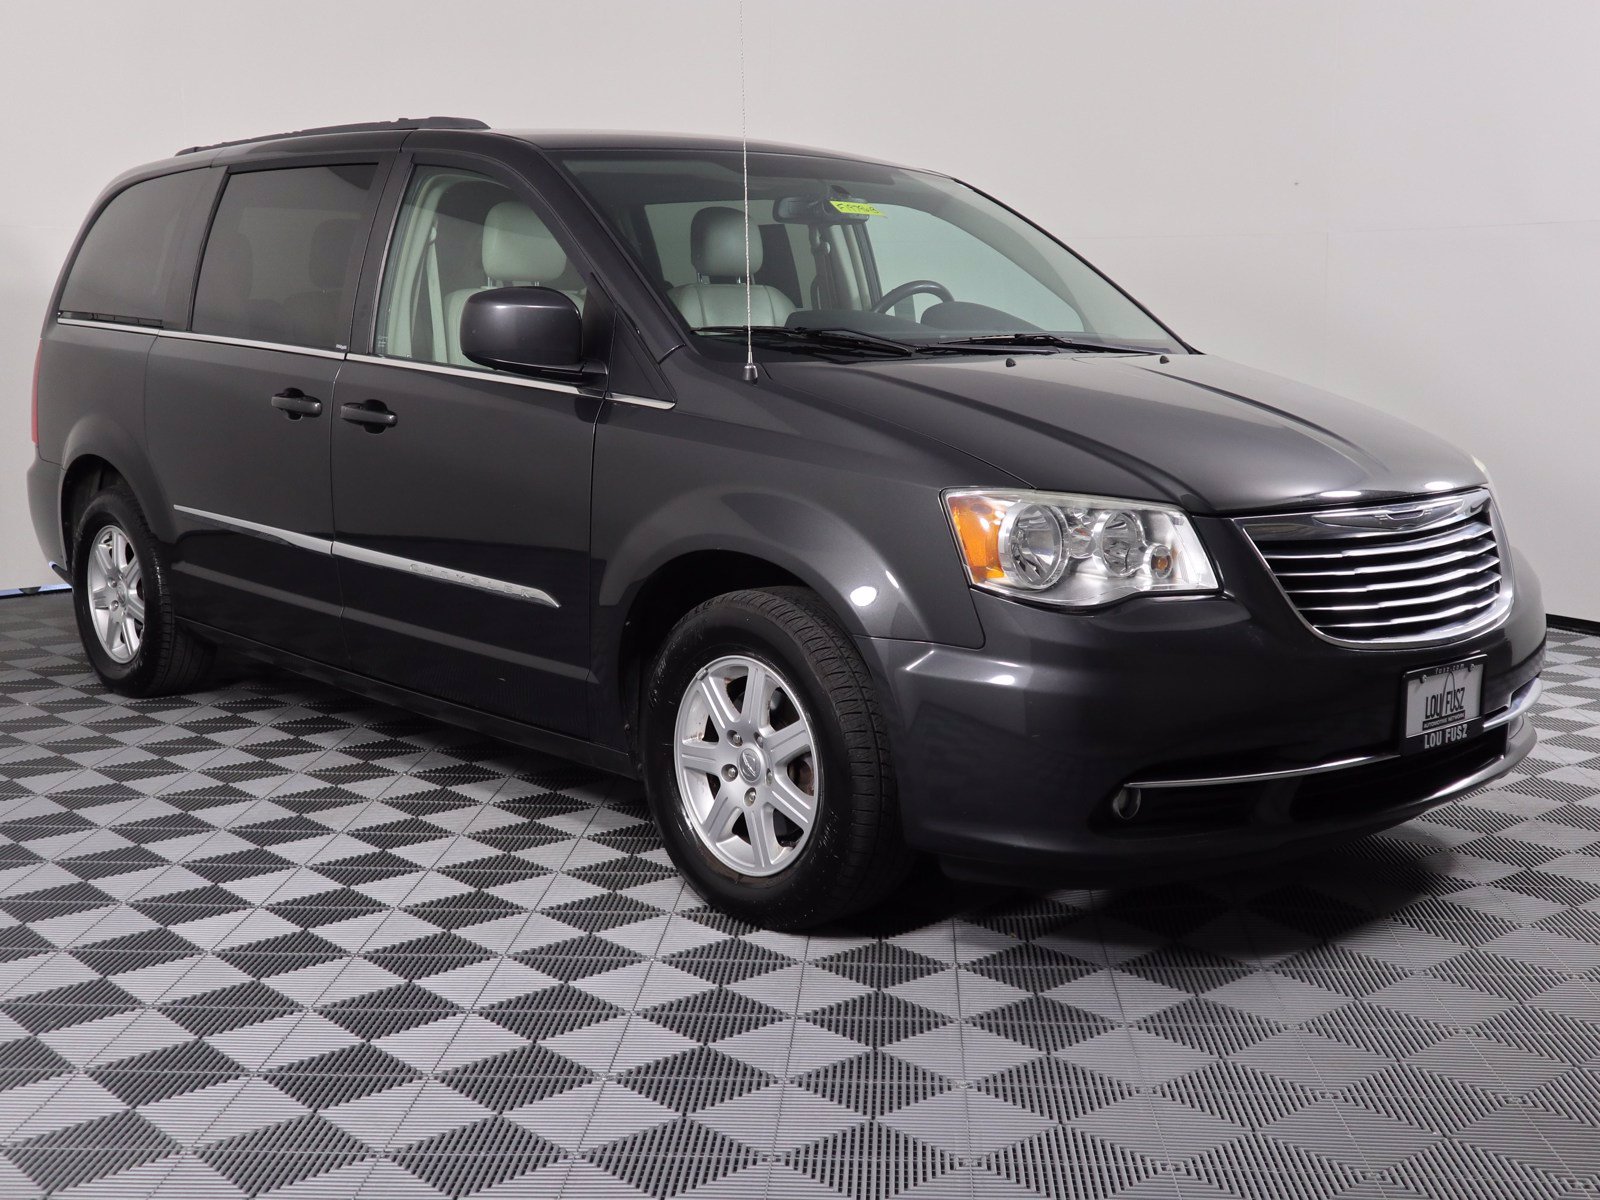 PreOwned 2012 Chrysler Town & Country Touring FWD Mini